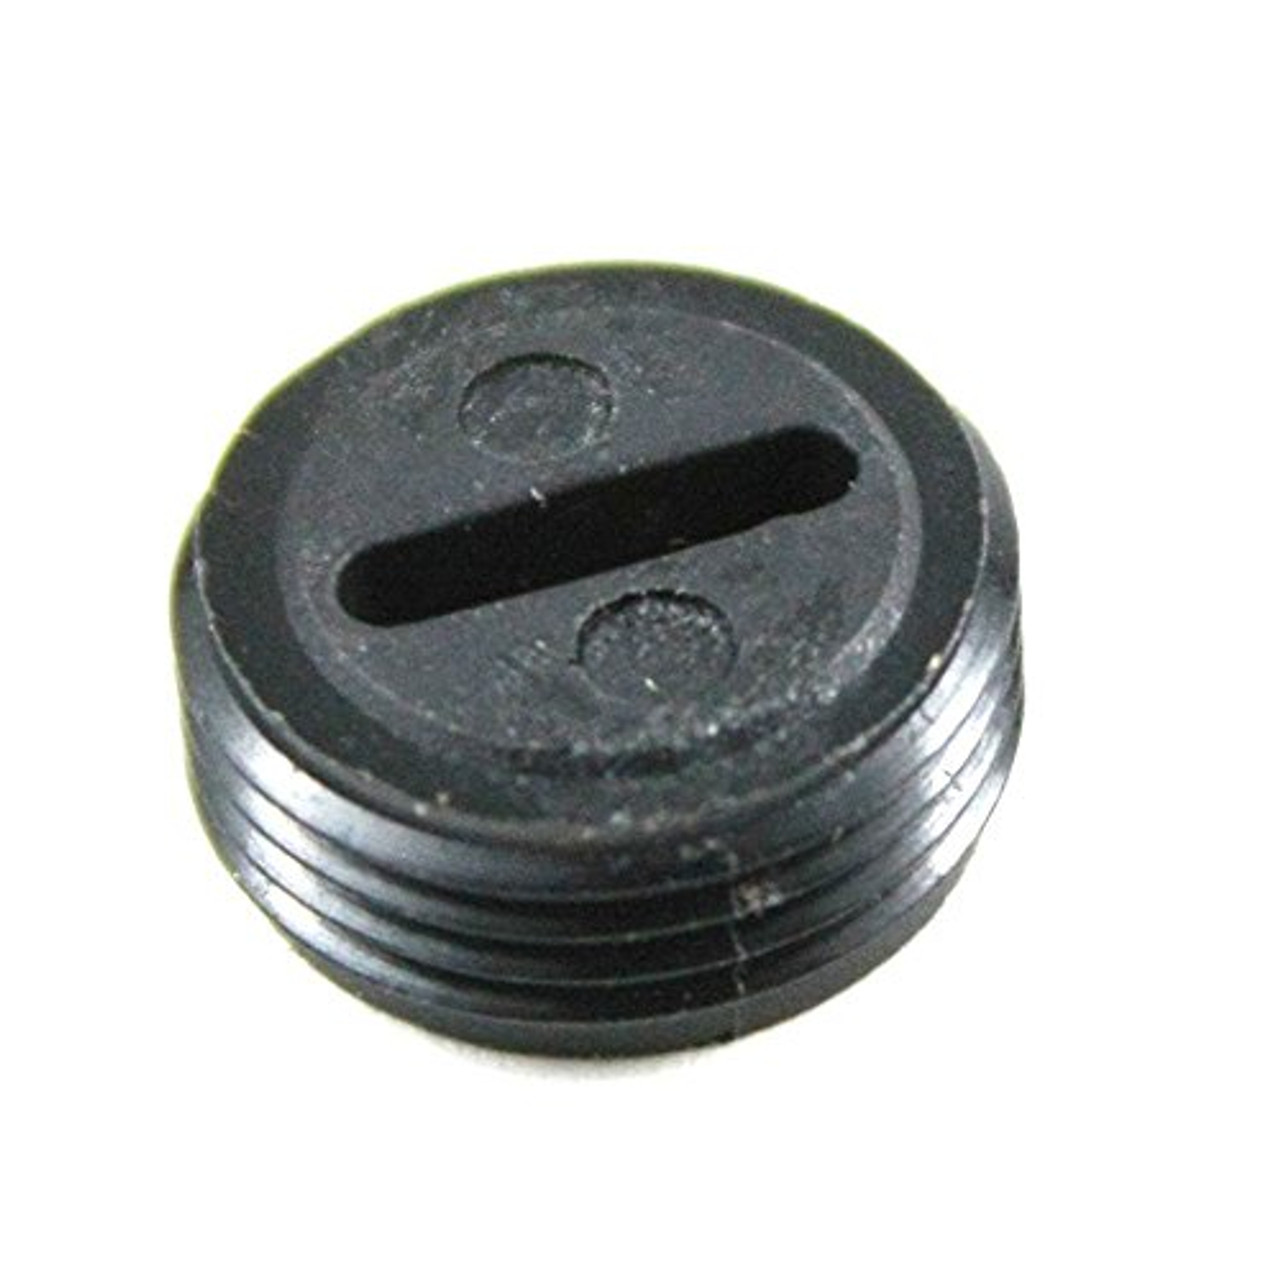 Two Pieces PORTER-CABLE 823727 Replacement Cap